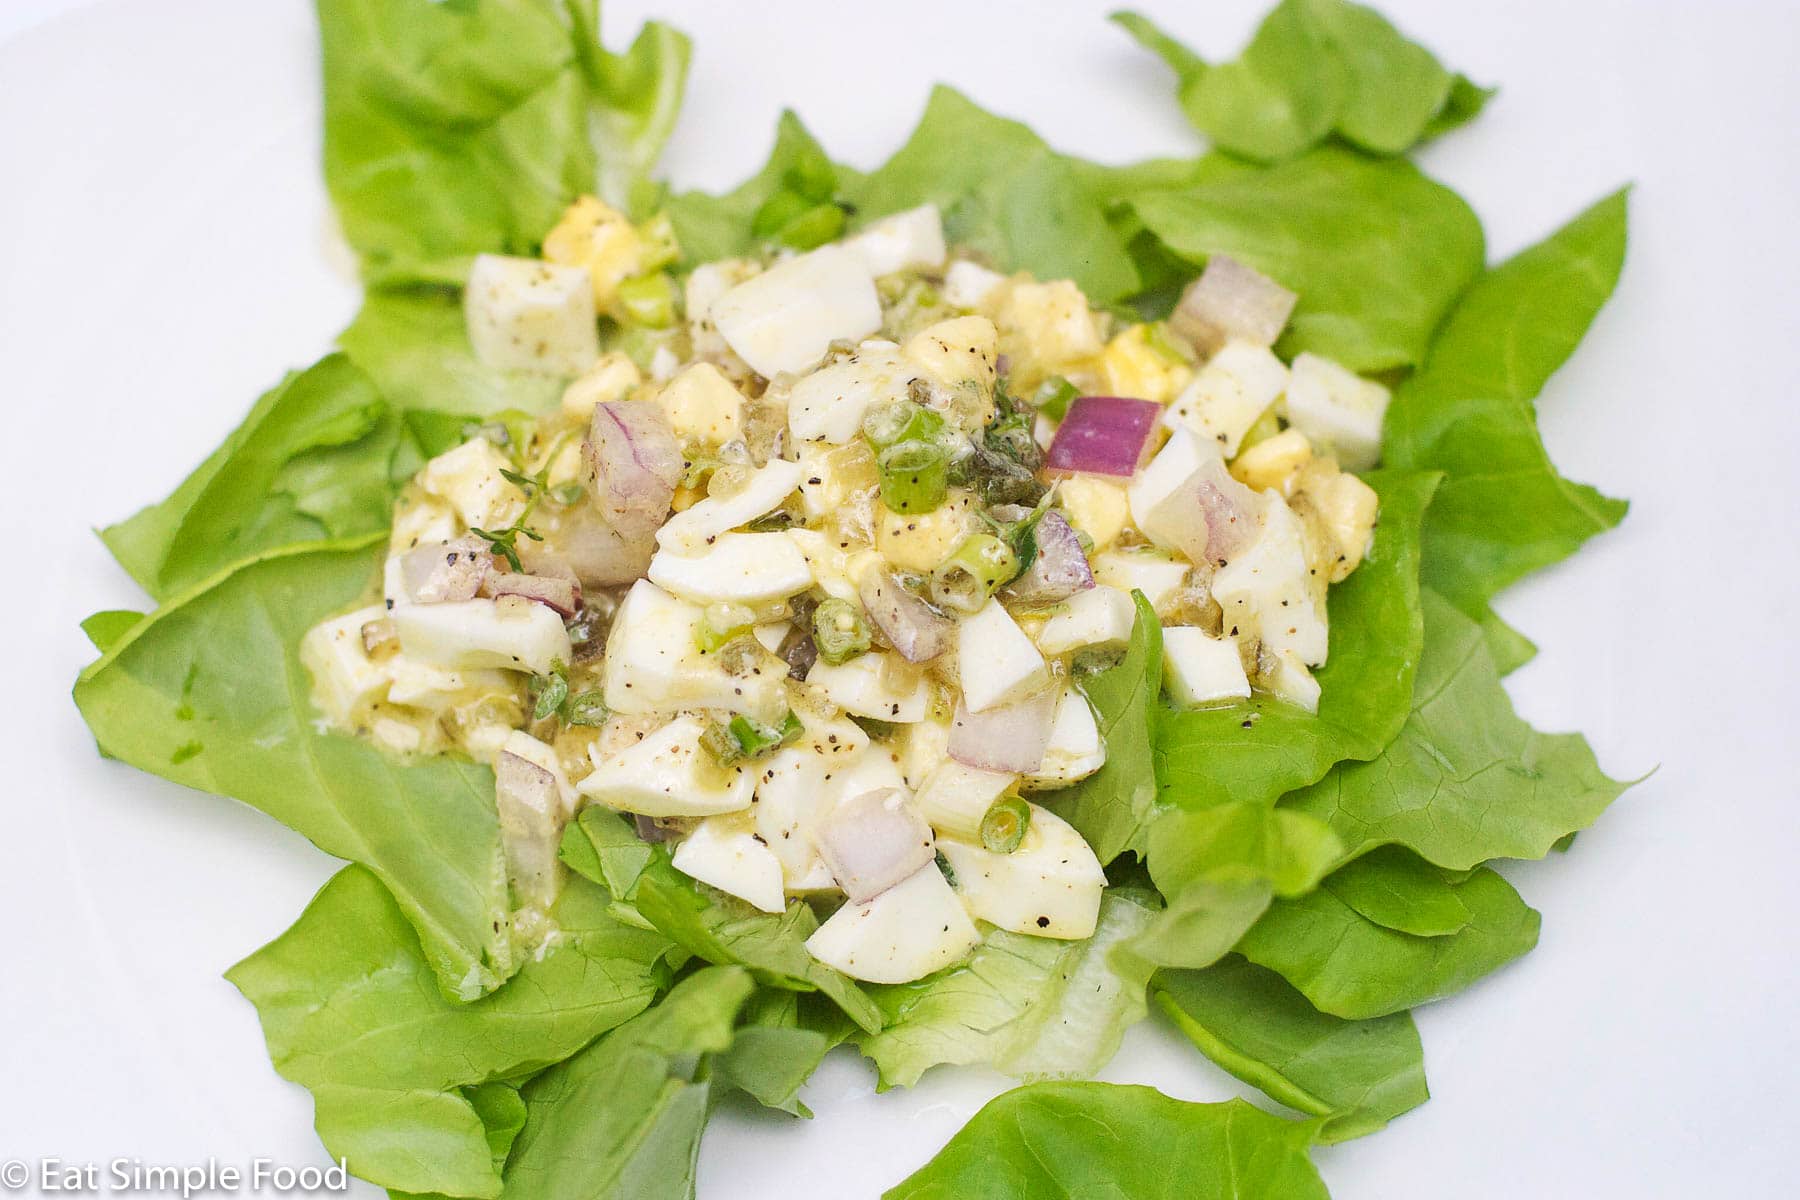 Diced egg mixed with thyme, diced red onions, capers, and sliced chives on a bed of butter lettuce.